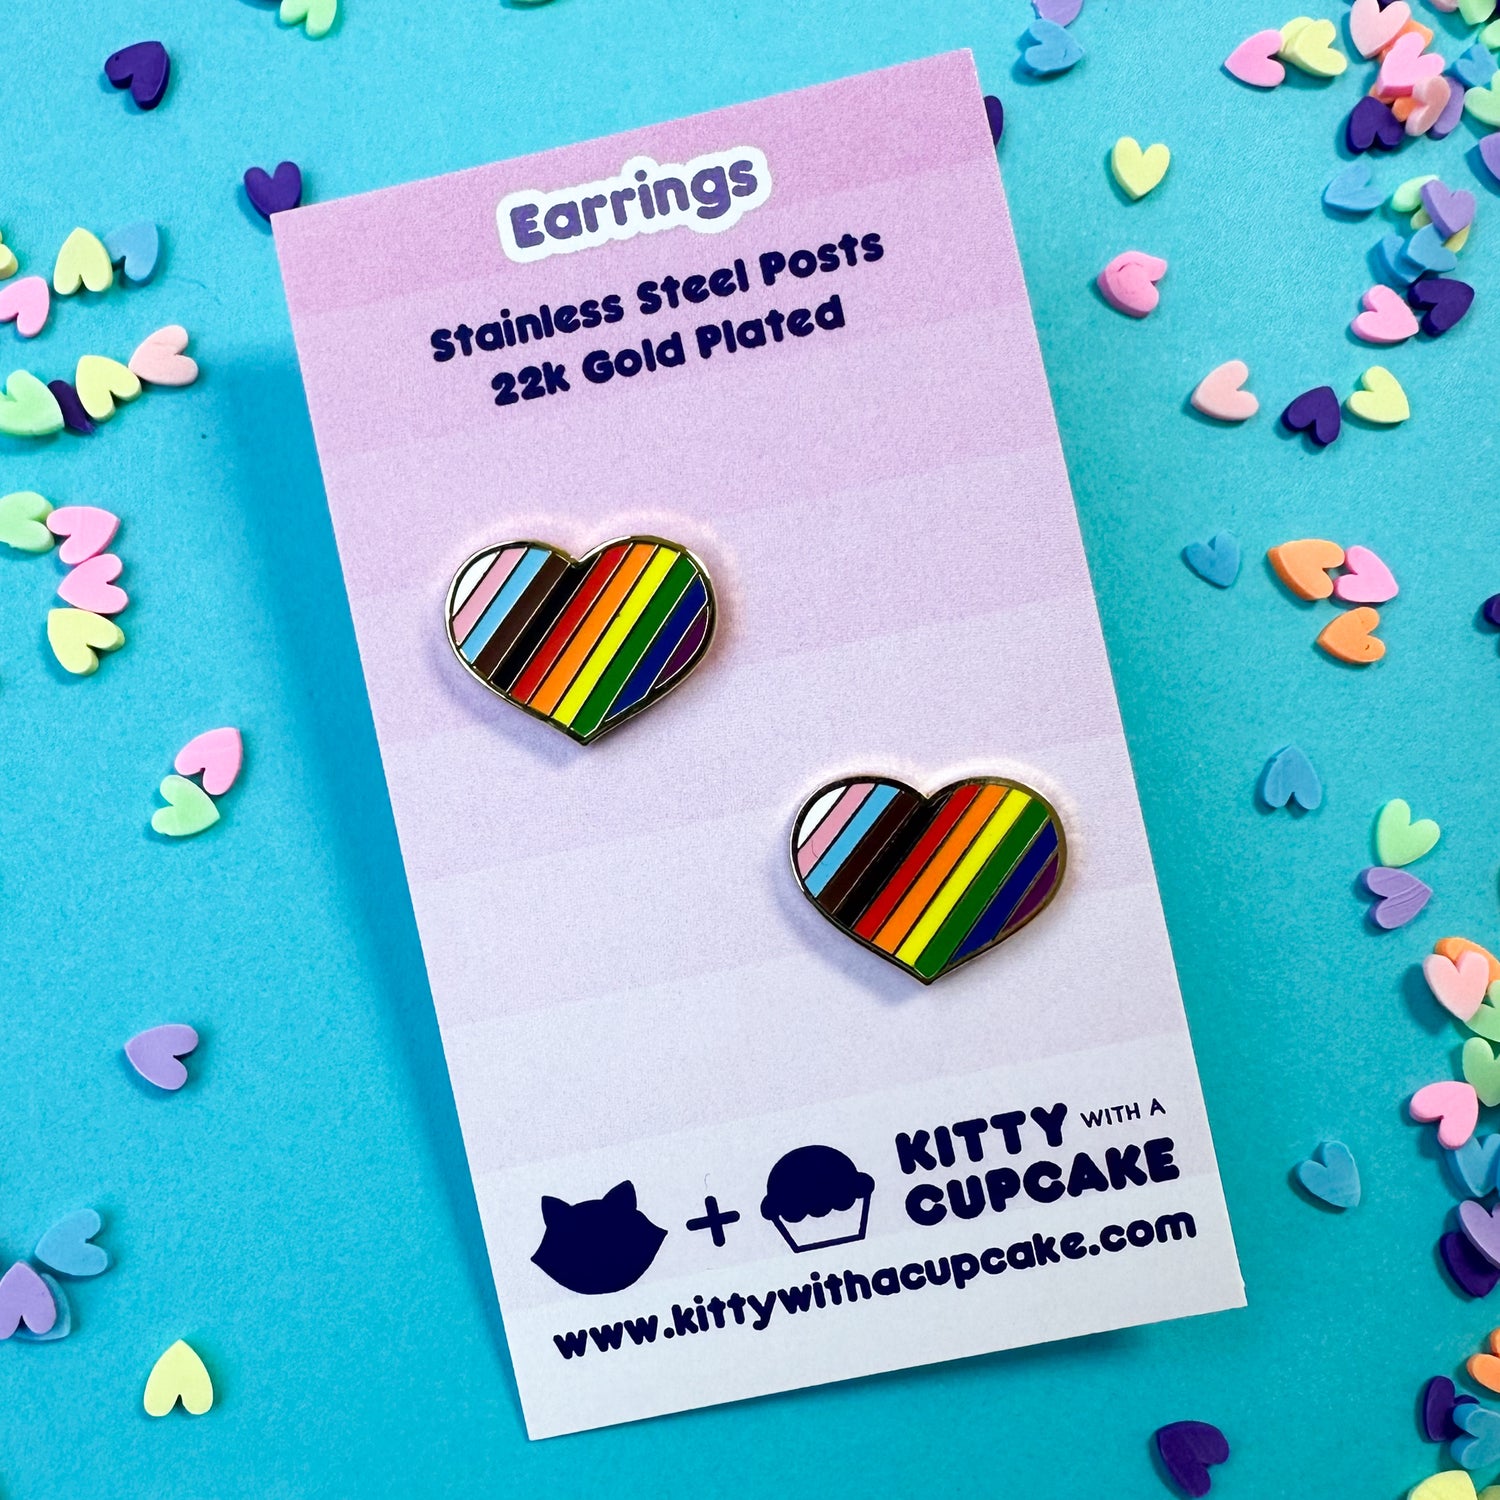 Two chunky heart earrings with diagonal stripes on them in the progress pride flag colors. The earrings are packaged on a pink card that is sitting on top of a blue background with confetti hearts around it. 